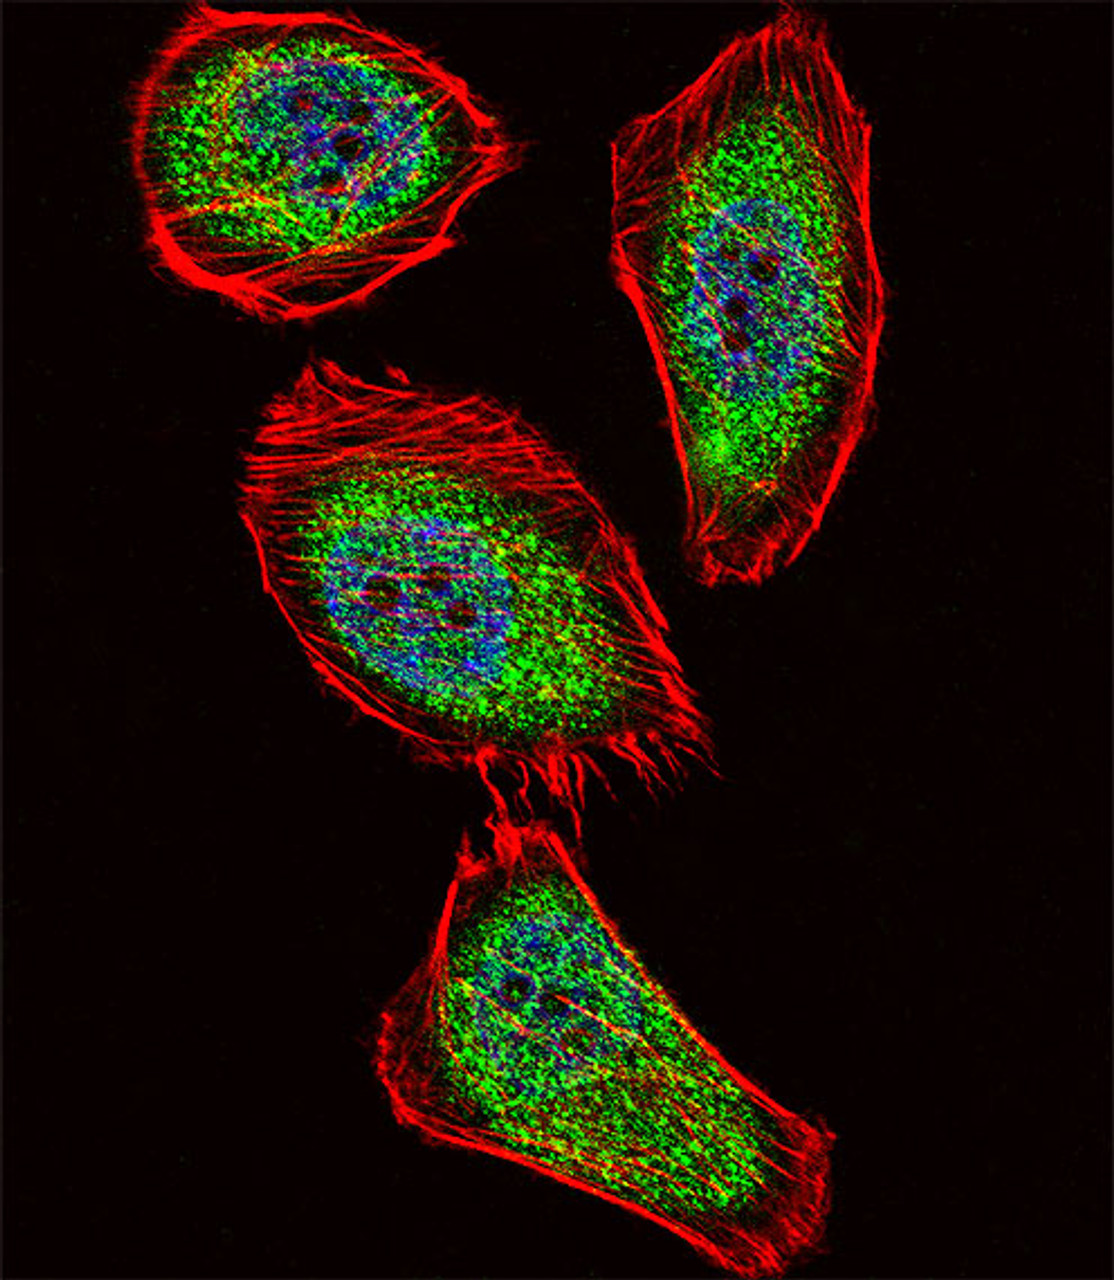 Fluorescent confocal image of U251 cell stained with IPF Antibody .U251 cells were fixed with 4% PFA (20 min) , permeabilized with Triton X-100 (0.1%, 10 min) , then incubated with IPF primary antibody (1:25) . For secondary antibody, Alexa Fluor 488 conjugated donkey anti-rabbit antibody (green) was used (1:400) .Cytoplasmic actin was counterstained with Alexa Fluor 555 (red) conjugated Phalloidin (7units/ml) . Nuclei were counterstained with DAPI (blue) (10 ug/ml, 10 min) . IPF immunoreactivity is localized to Cytoplasm and Nucleus significantly.